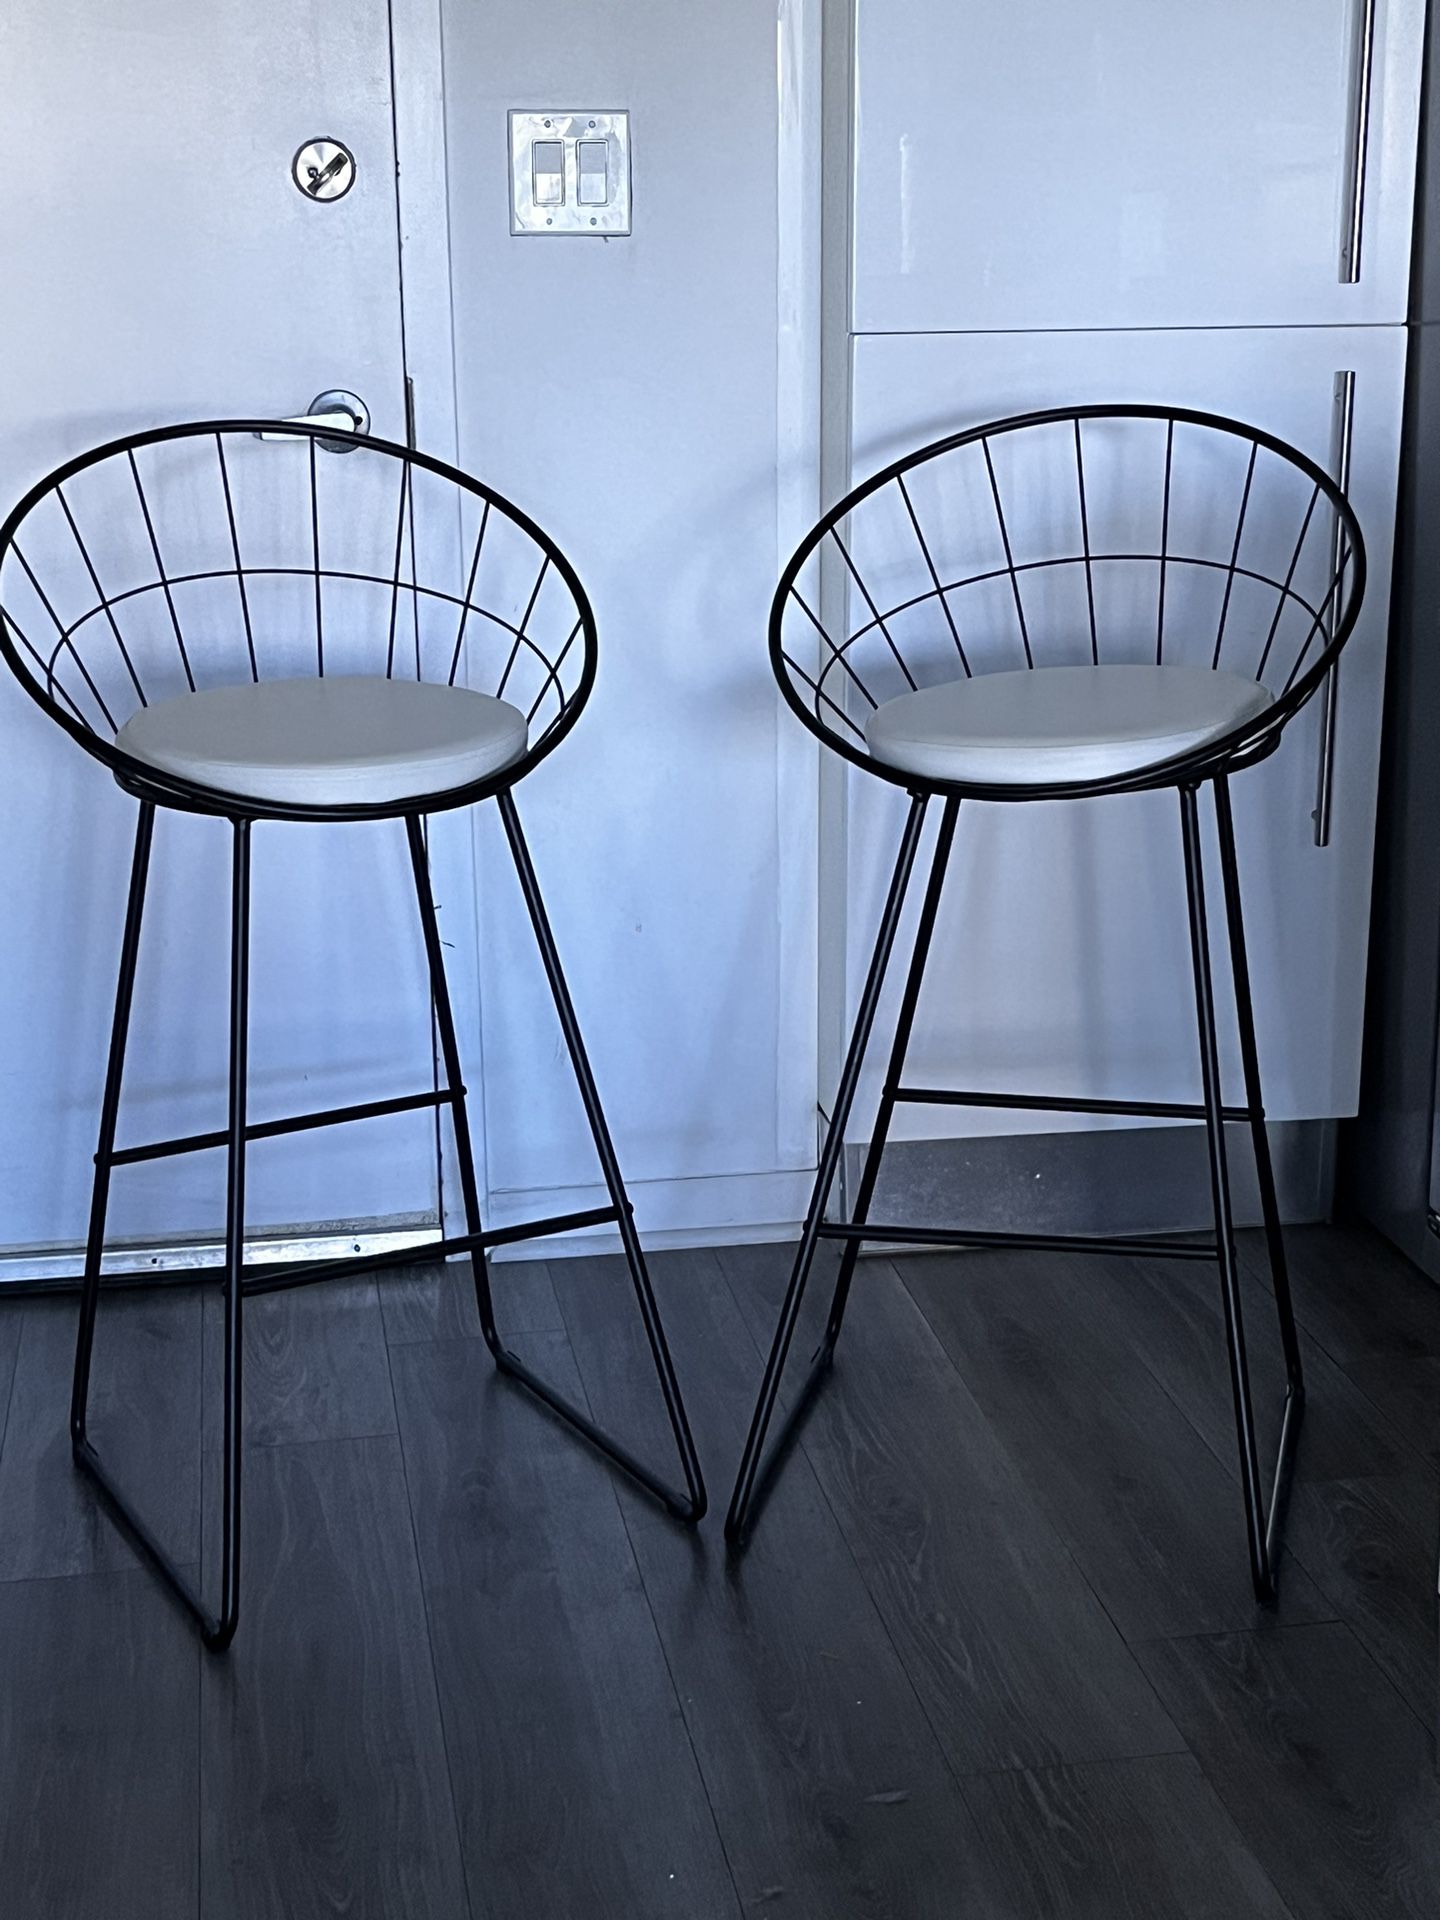 2 Bar Stools - Alize 29.5” Black frame with White seat $50